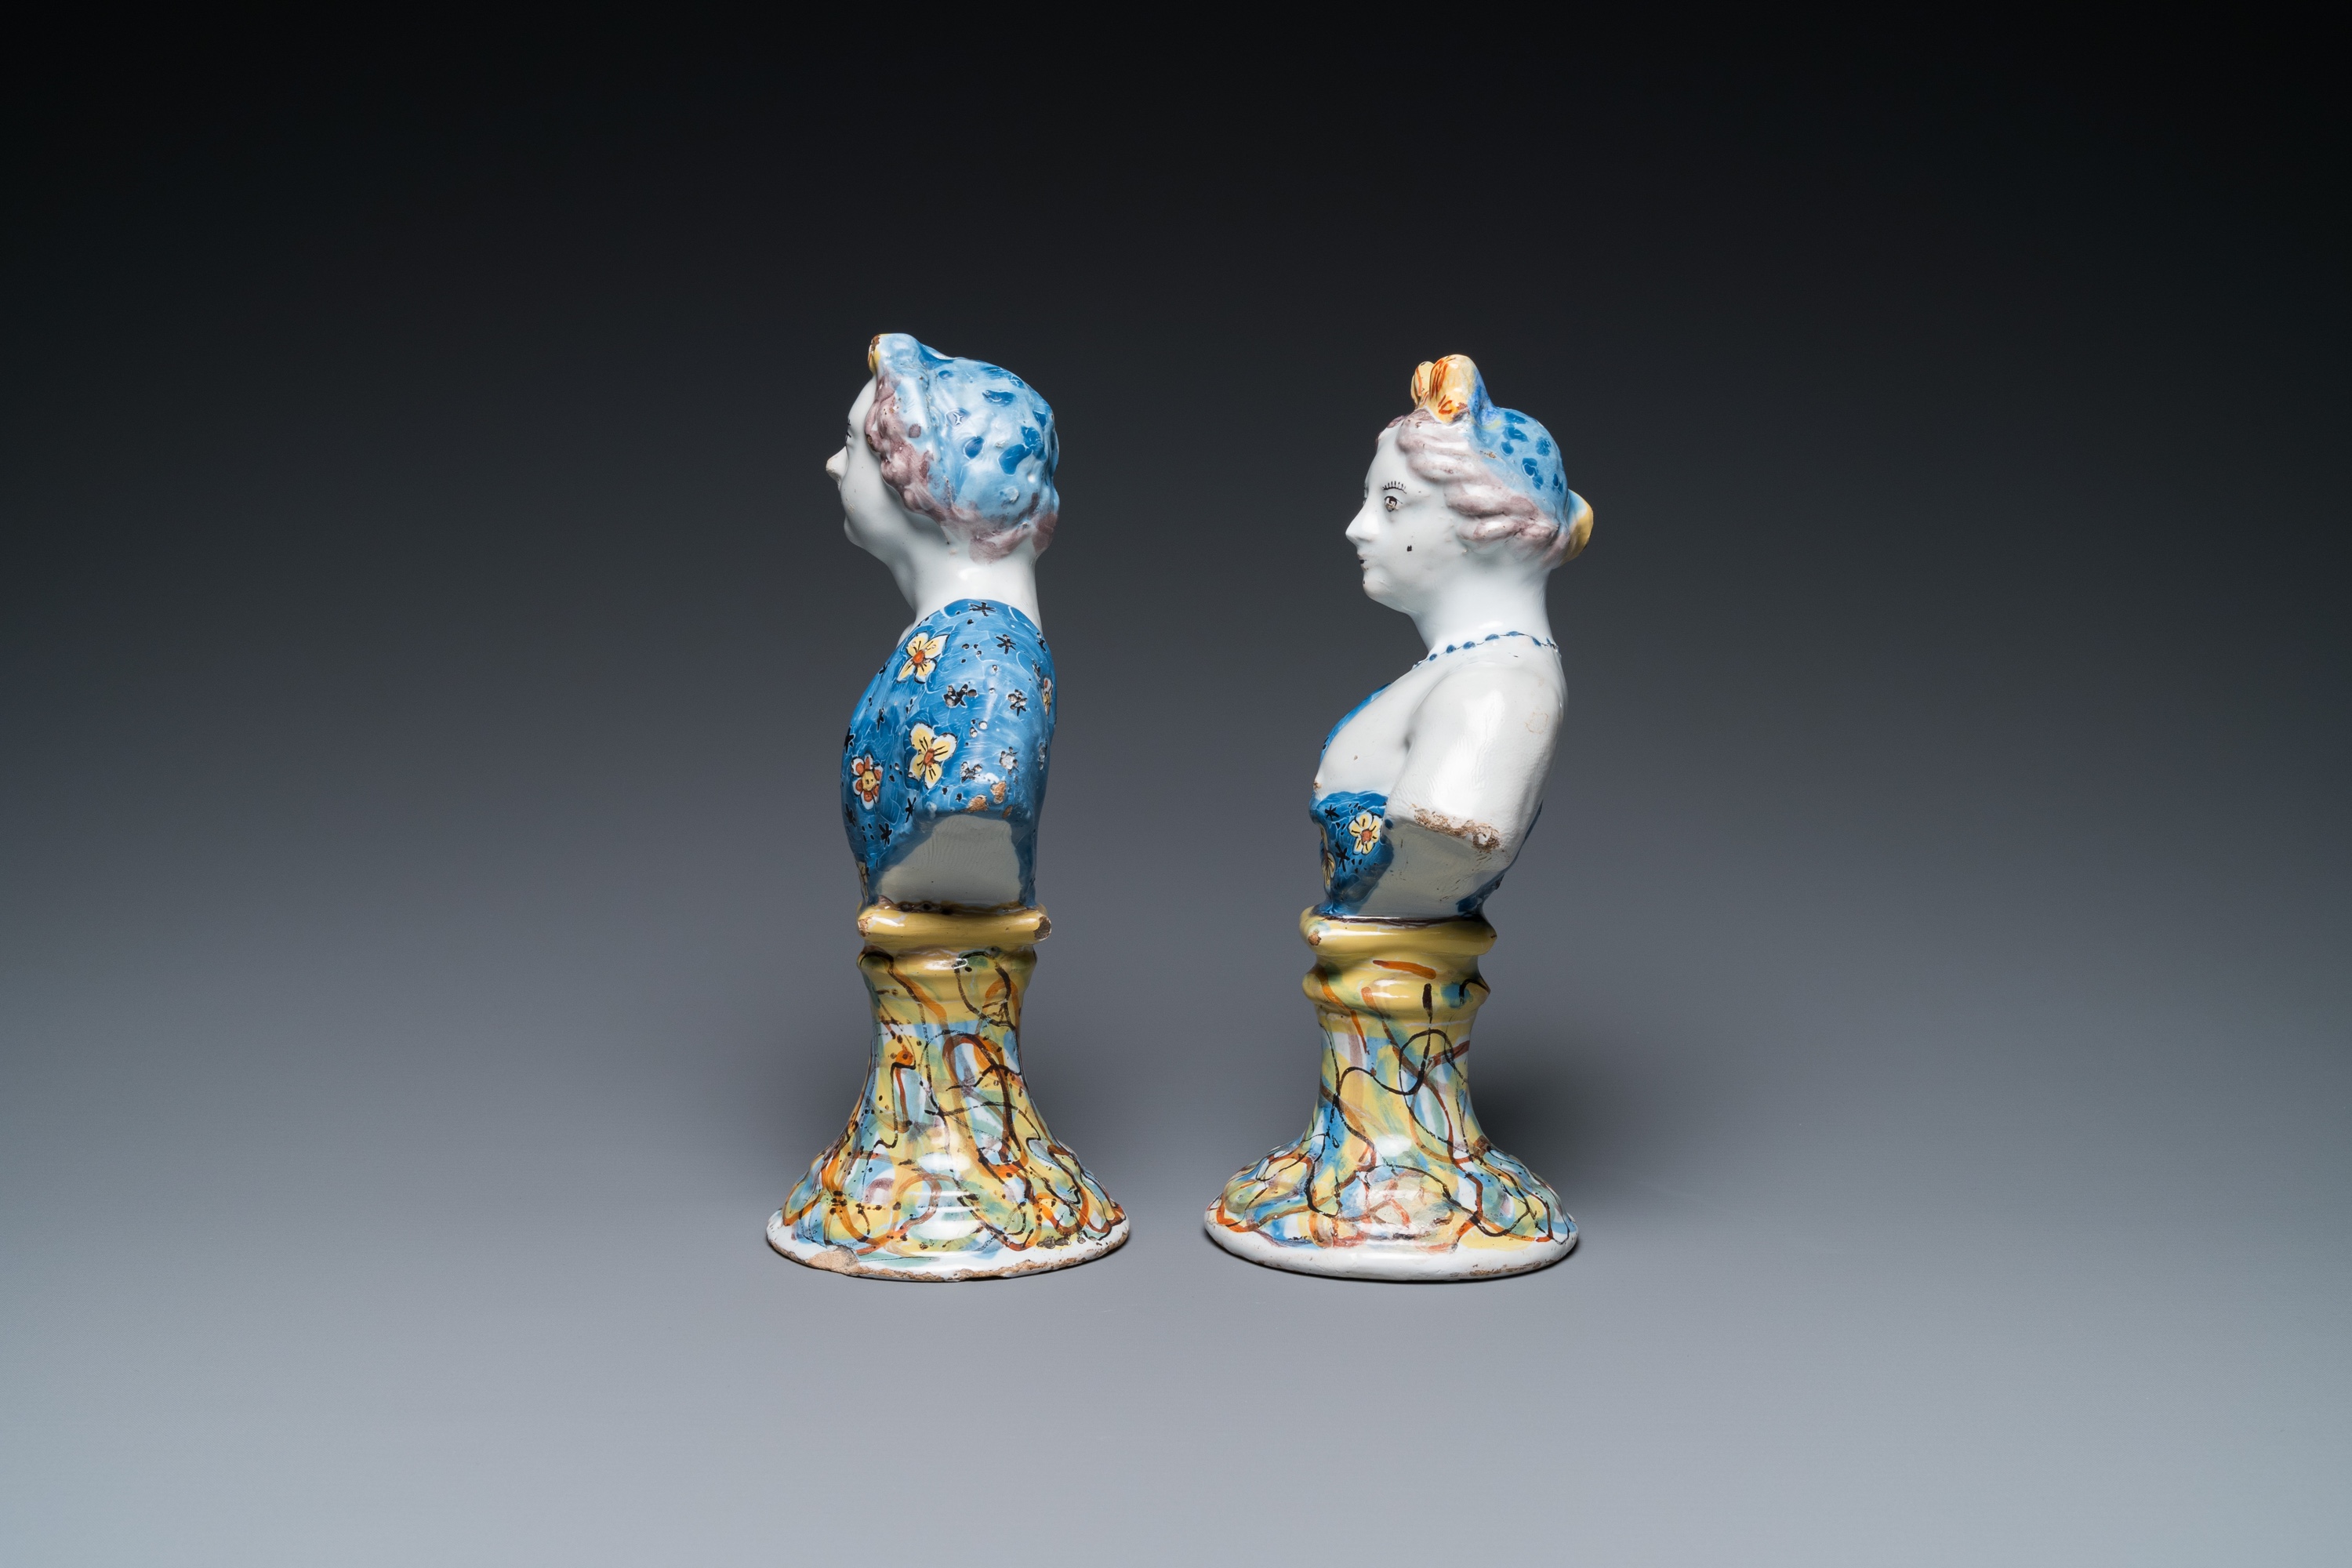 A pair of polychrome Dutch Delft busts on bases imitating marble, 18th C. - Image 5 of 7